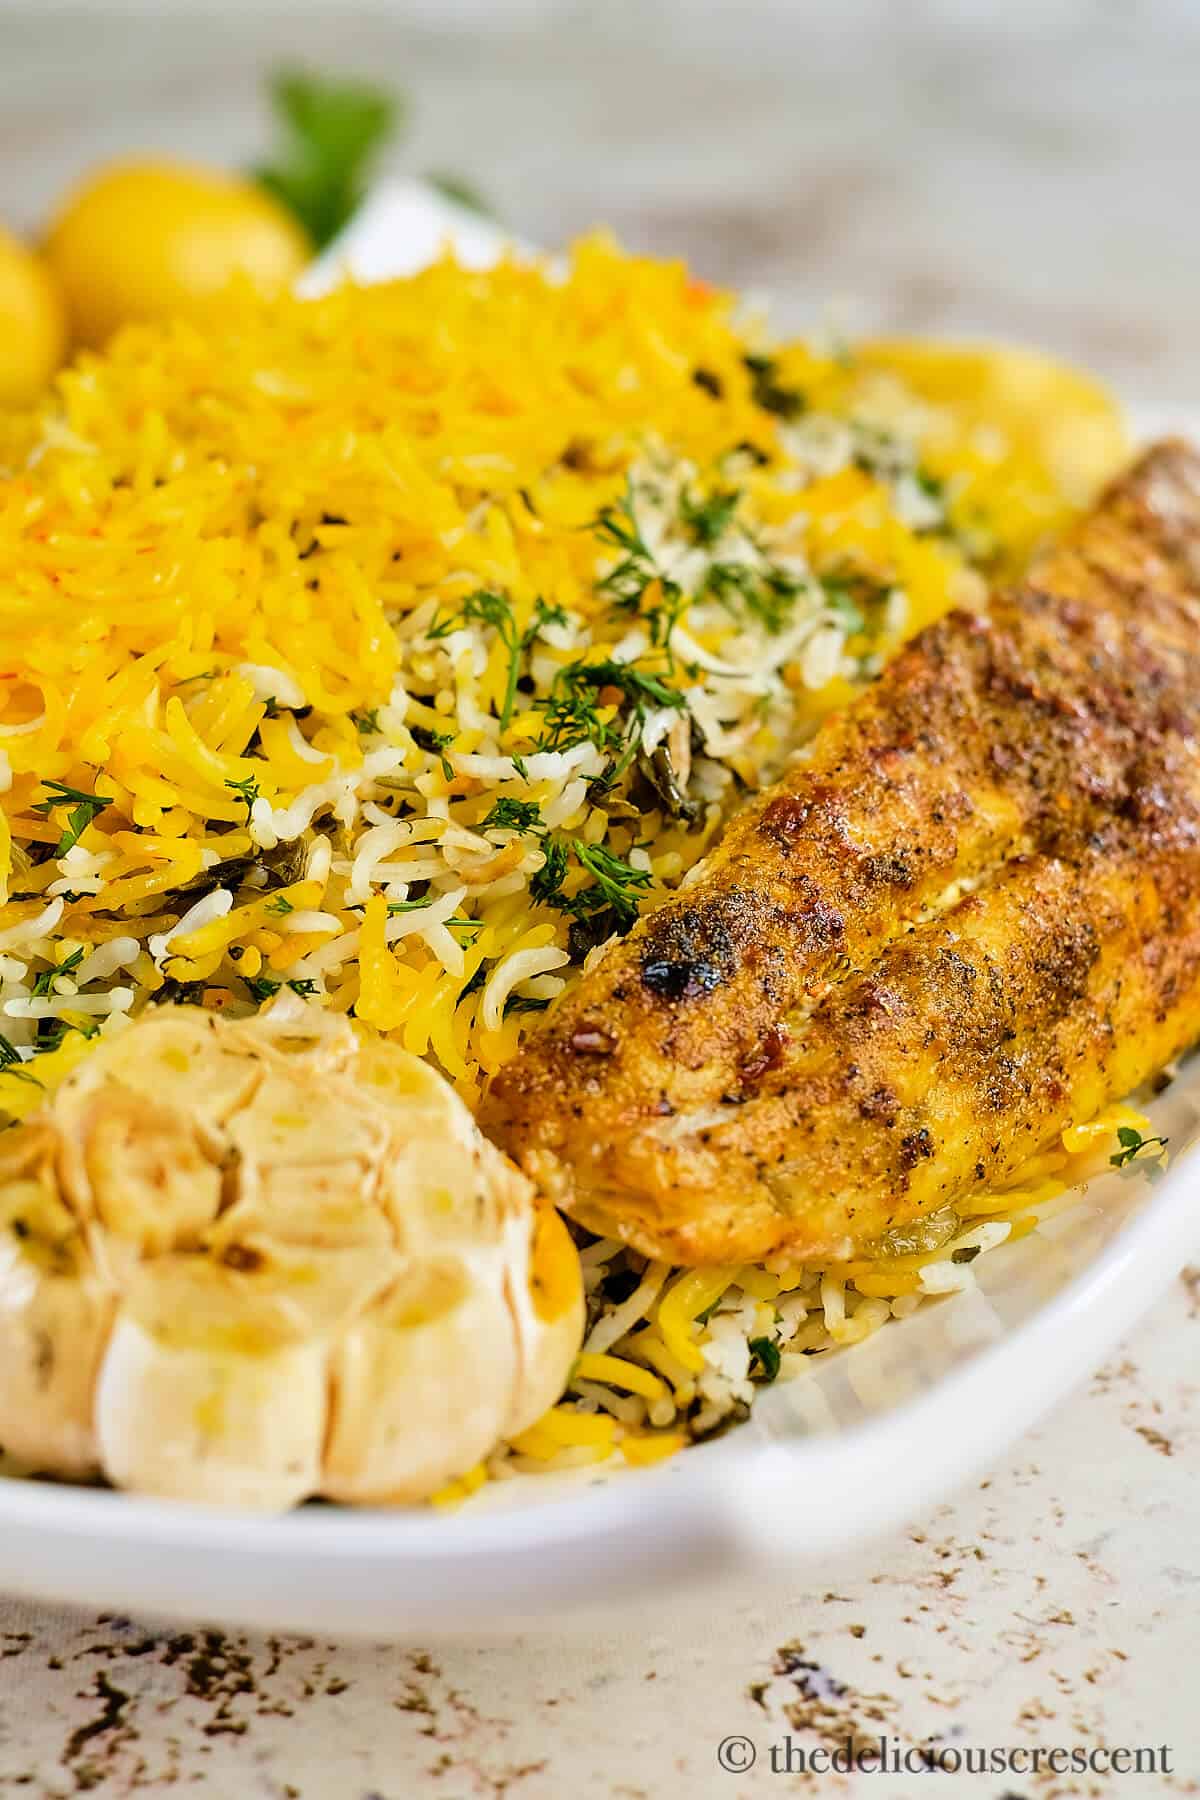 Fish arranged on top of Persian herb rice.